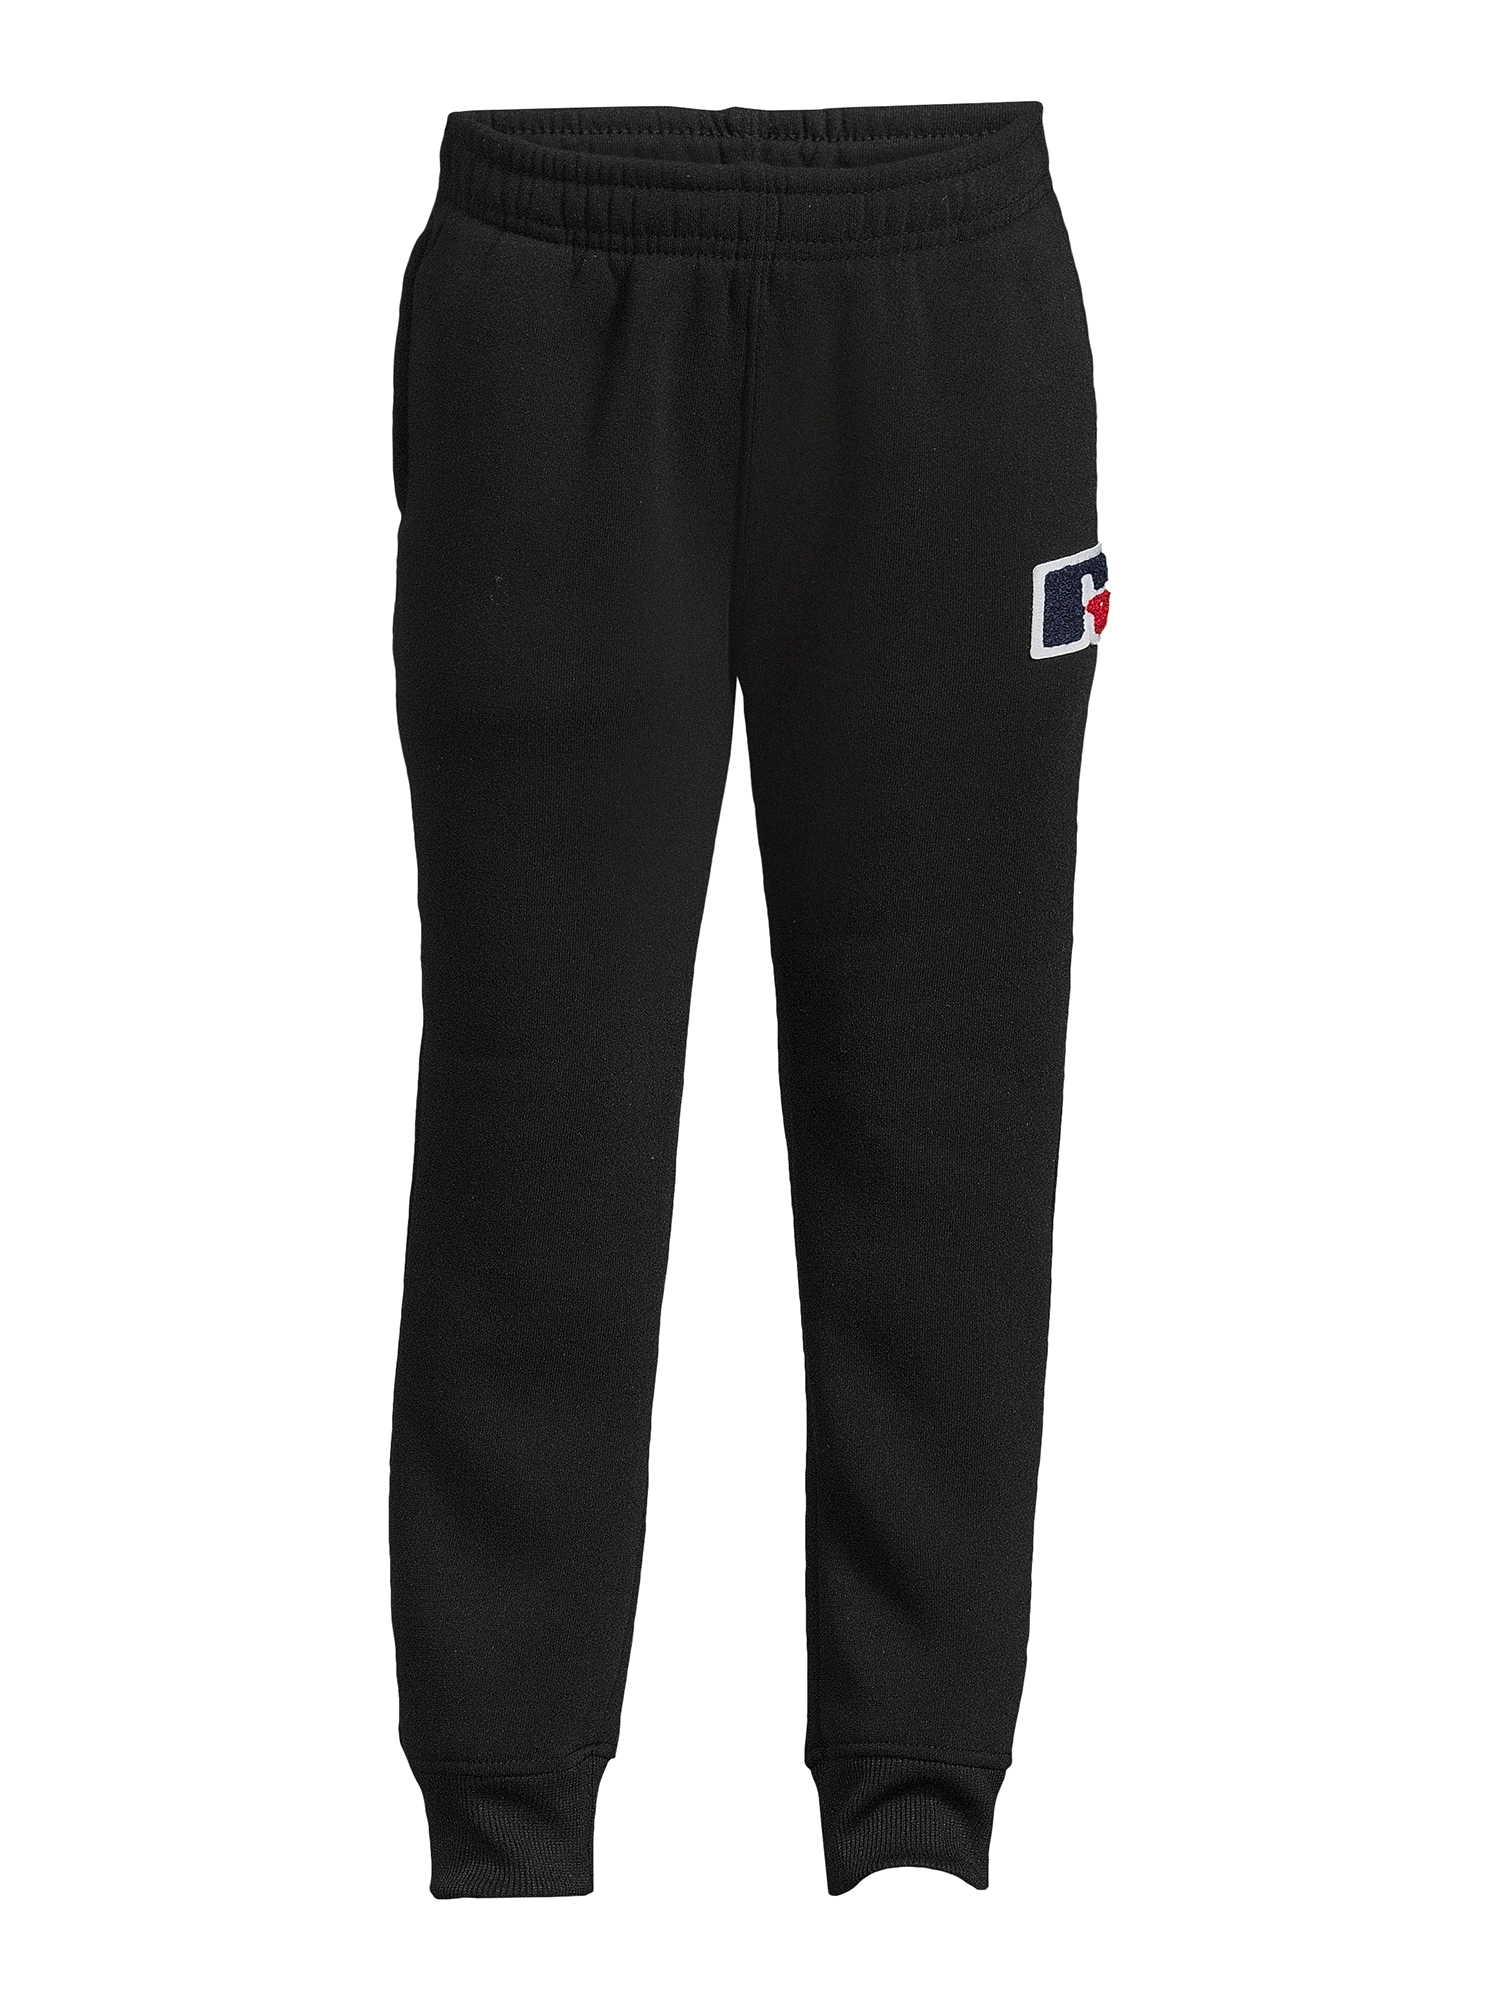 Russell Athletic Boys Chenille Jogger Pants, Sizes 4-16 - image 5 of 5